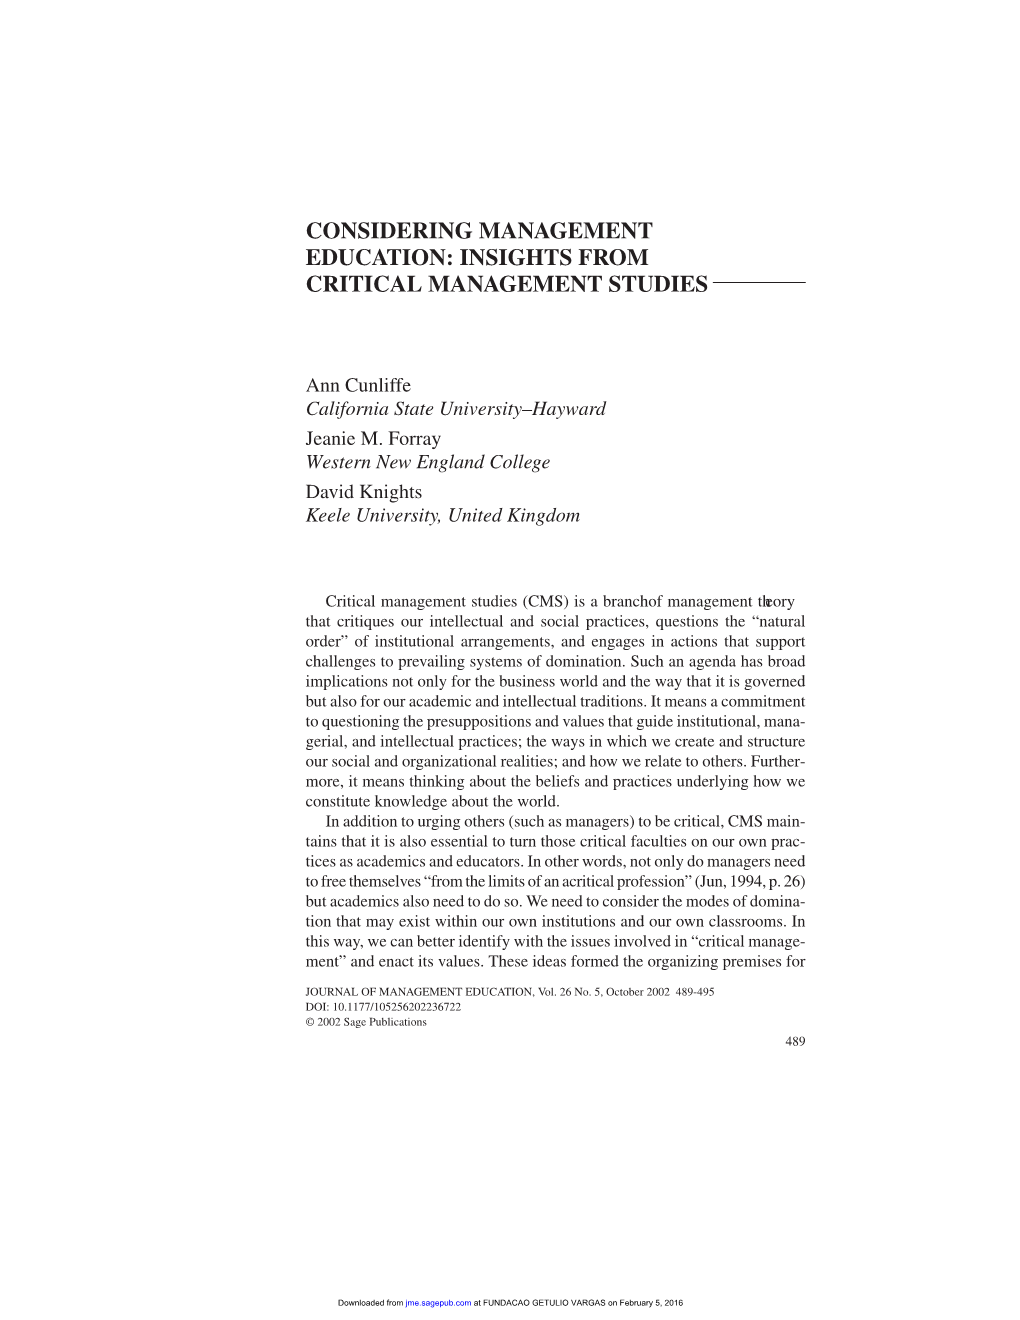 Considering Management Education: Insights from Critical Management Studies